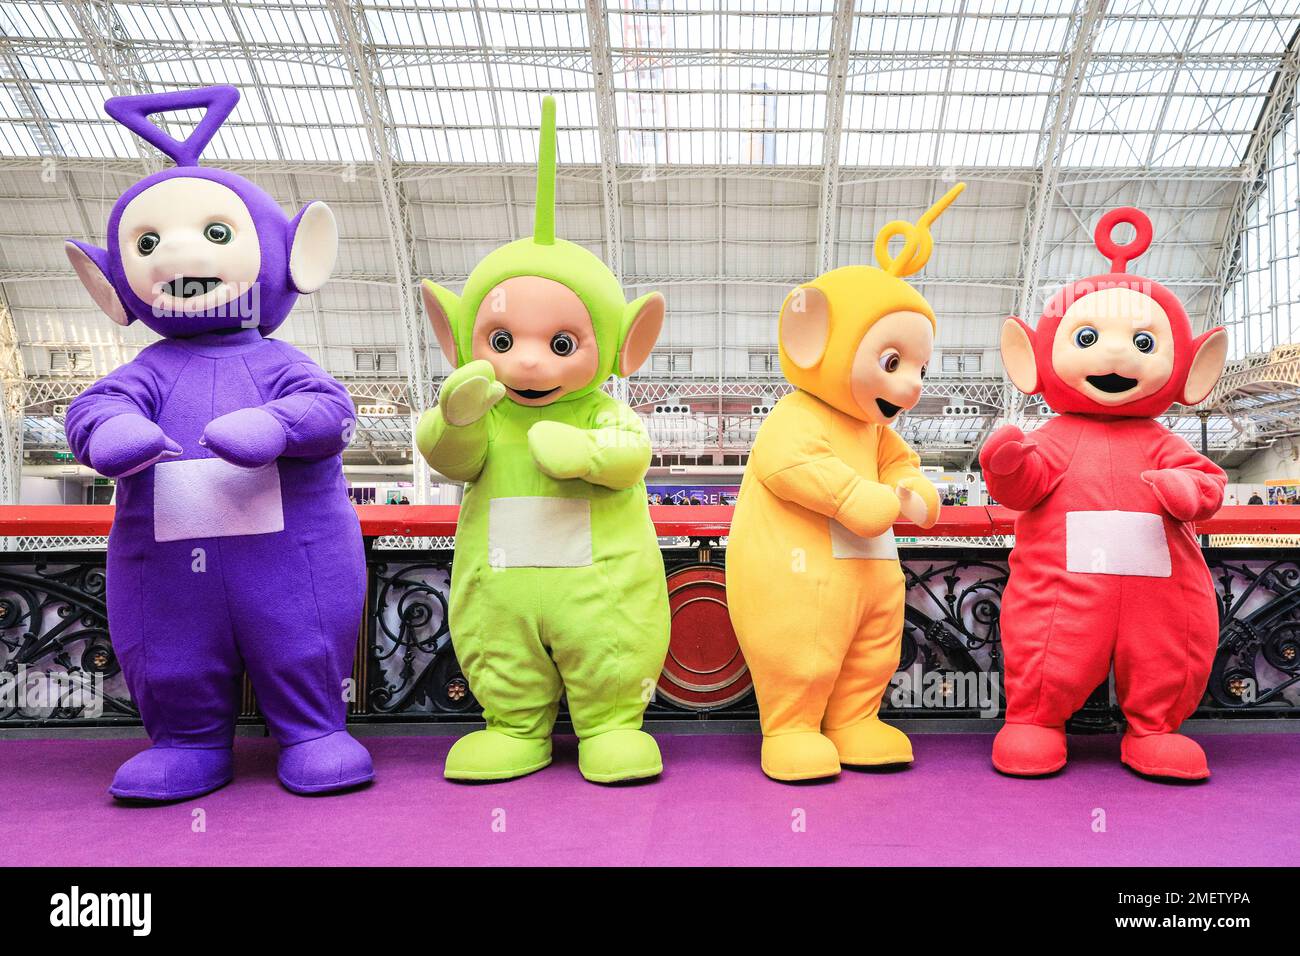 London, UK. 24th Jan, 2023. The teletubbies pose at the show. The Toy Fair opens its doors at Kensington Olympia to showcase the latest trends in the toy industry. The Toy Fair is the UK's largest dedicated toy, game and hobby trade show with more than 260 exhibitors. Credit: Imageplotter/Alamy Live News Stock Photo